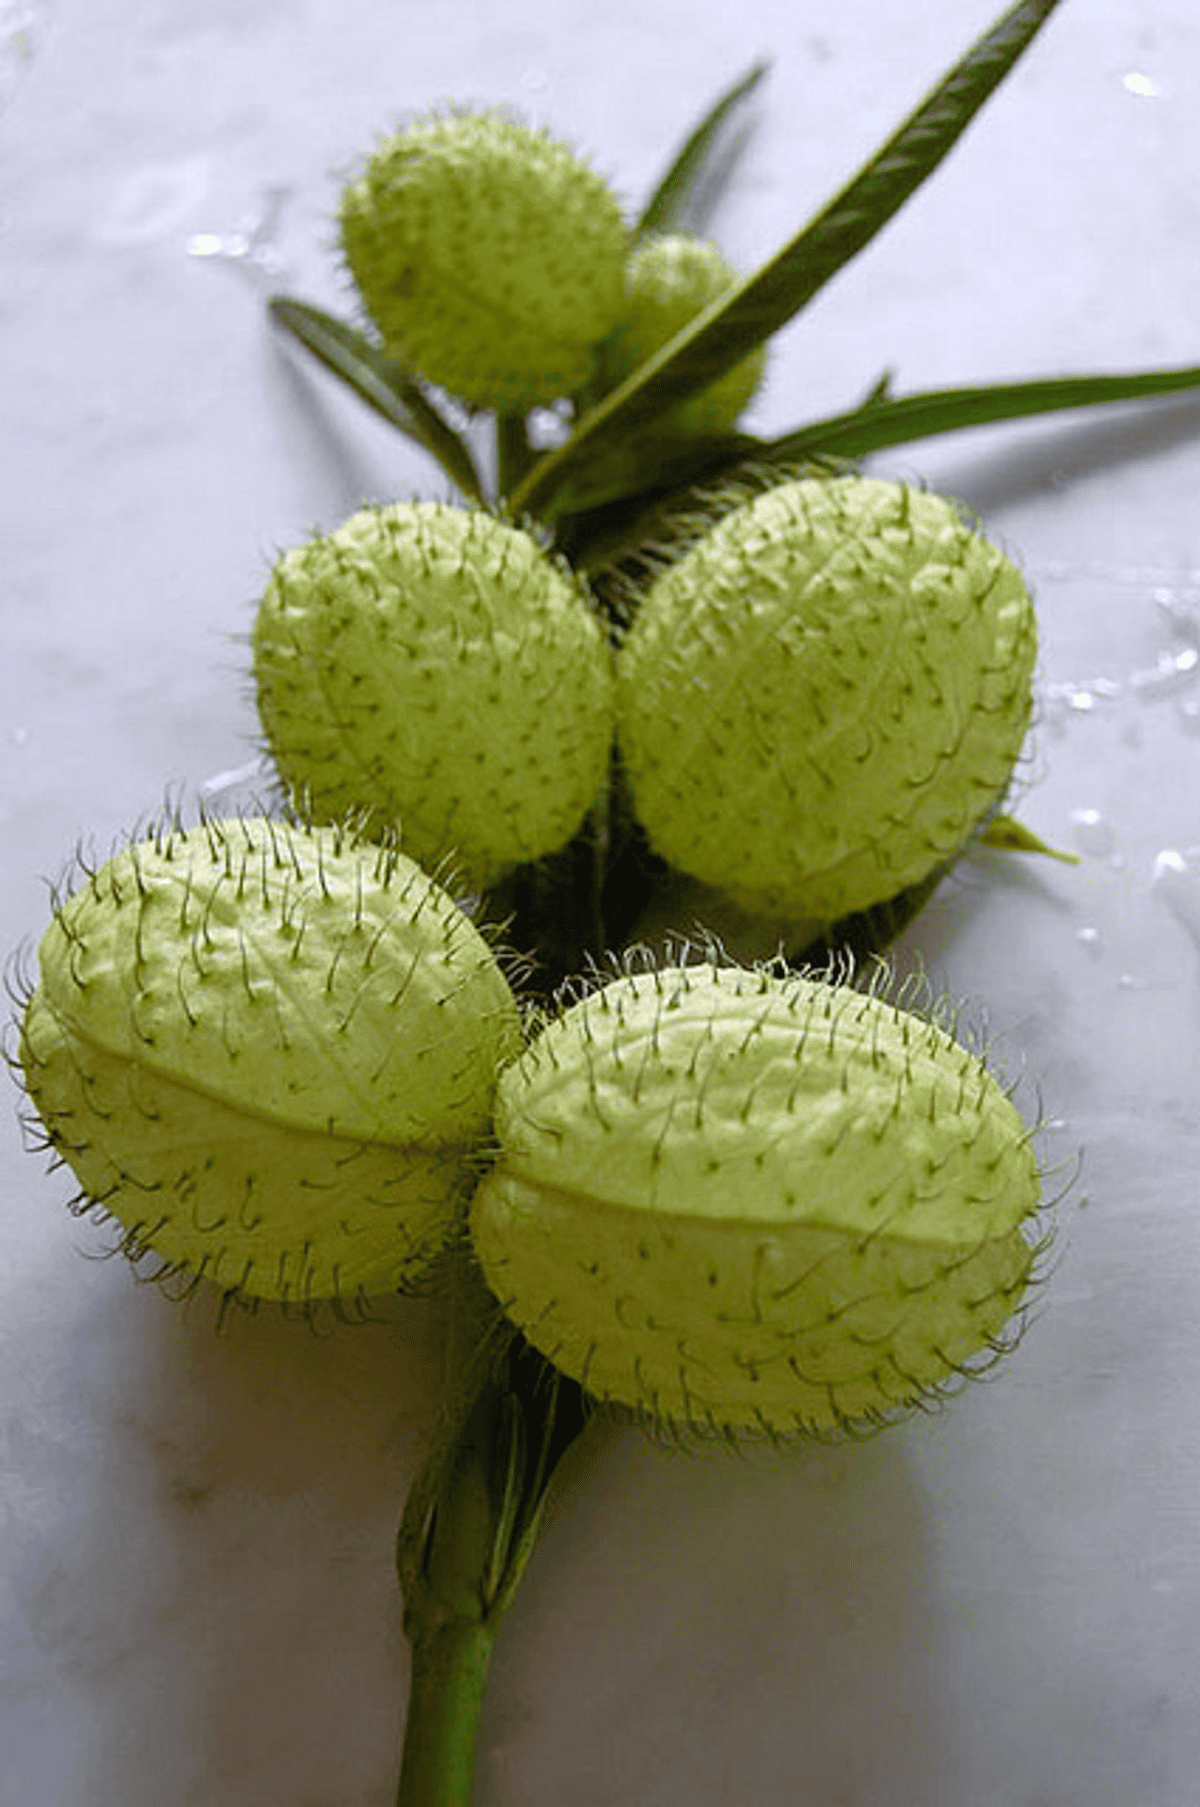 Green hairy balls flowers on marble countertop.